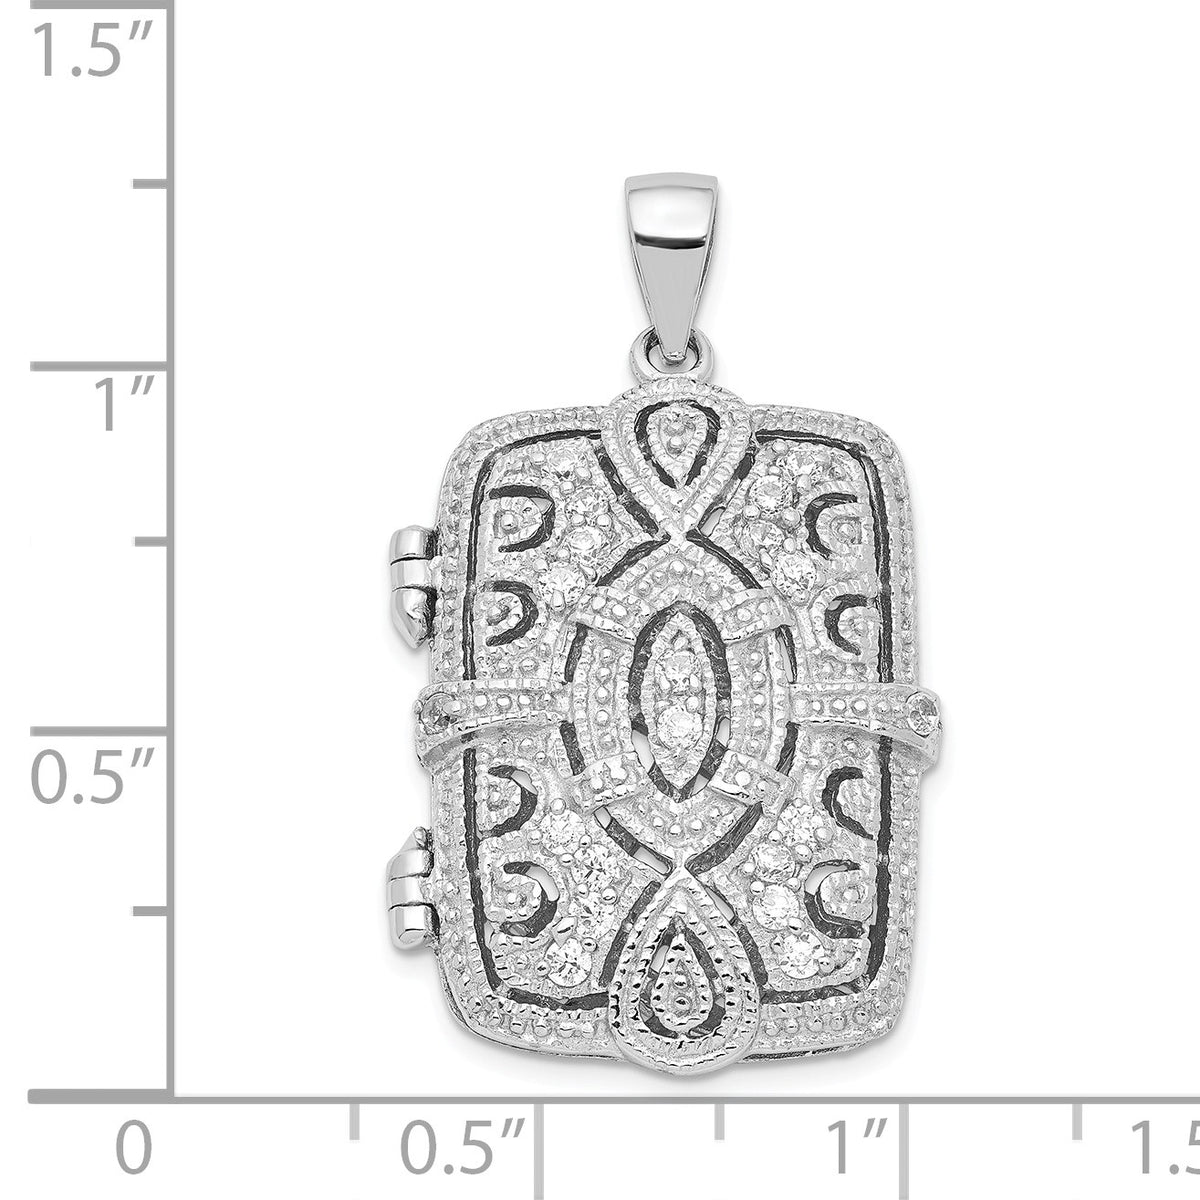 Alternate view of the Sterling Silver and CZ Geometric Design Rectangular Locket, 24mm by The Black Bow Jewelry Co.